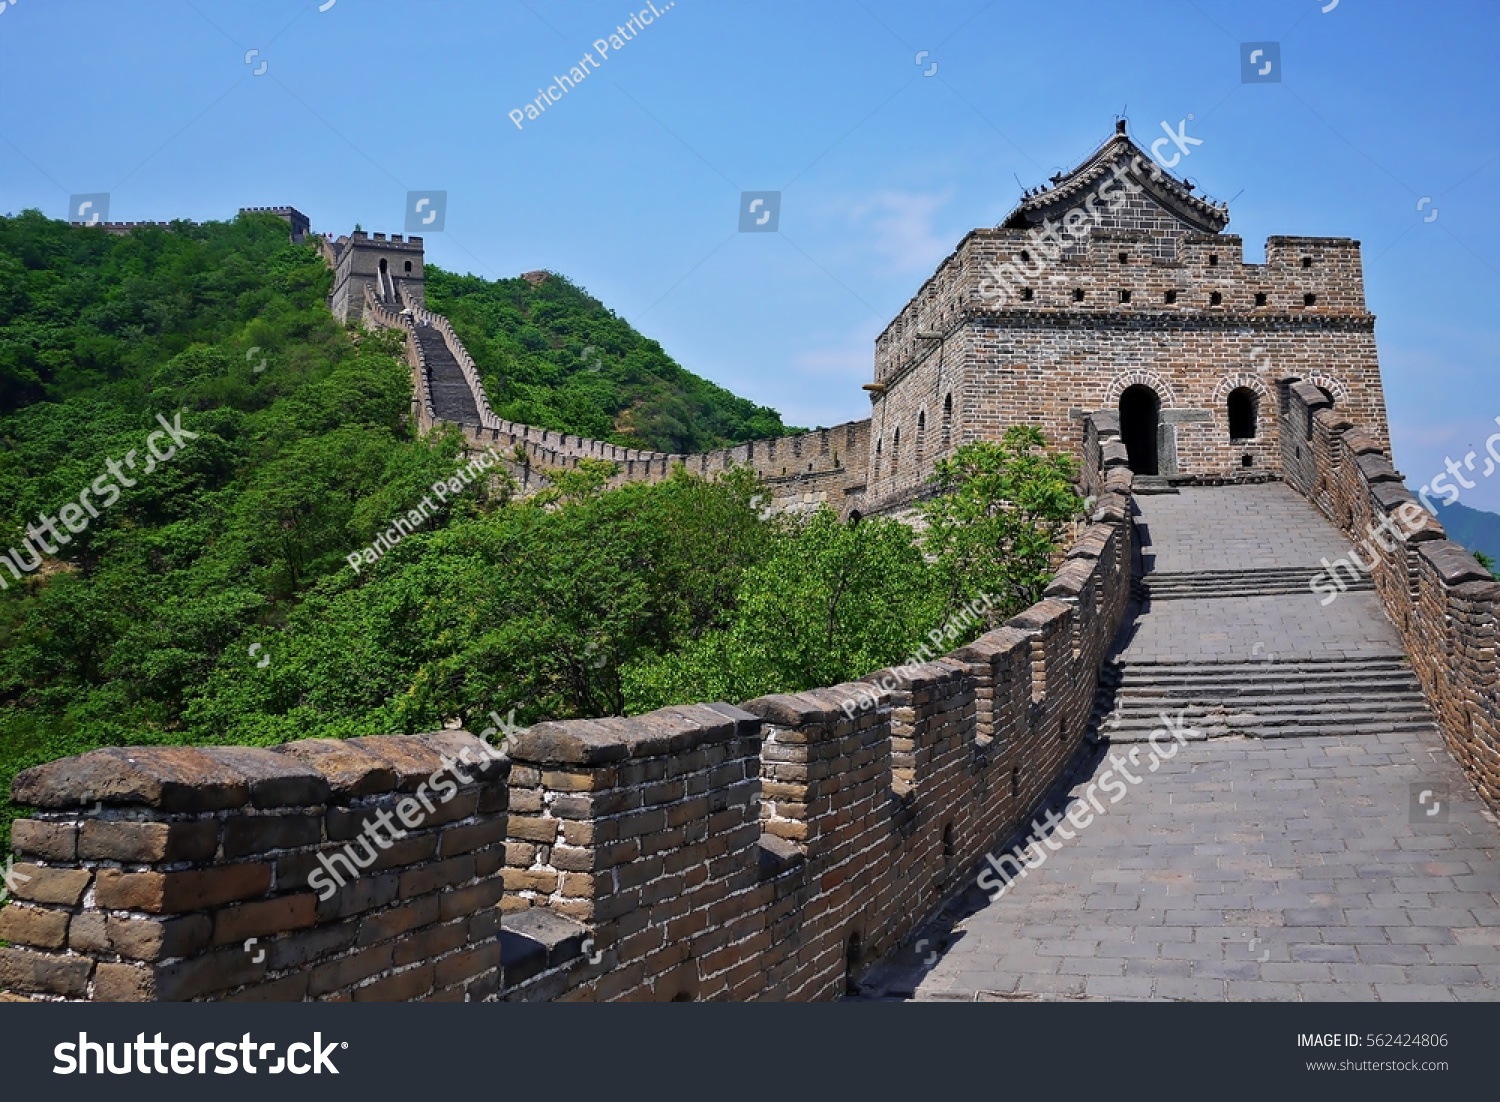 A beautiful green mountain and the watchtower of The Great Wall of China in summer at Mutianyu section nears Beijing, China. #562424806